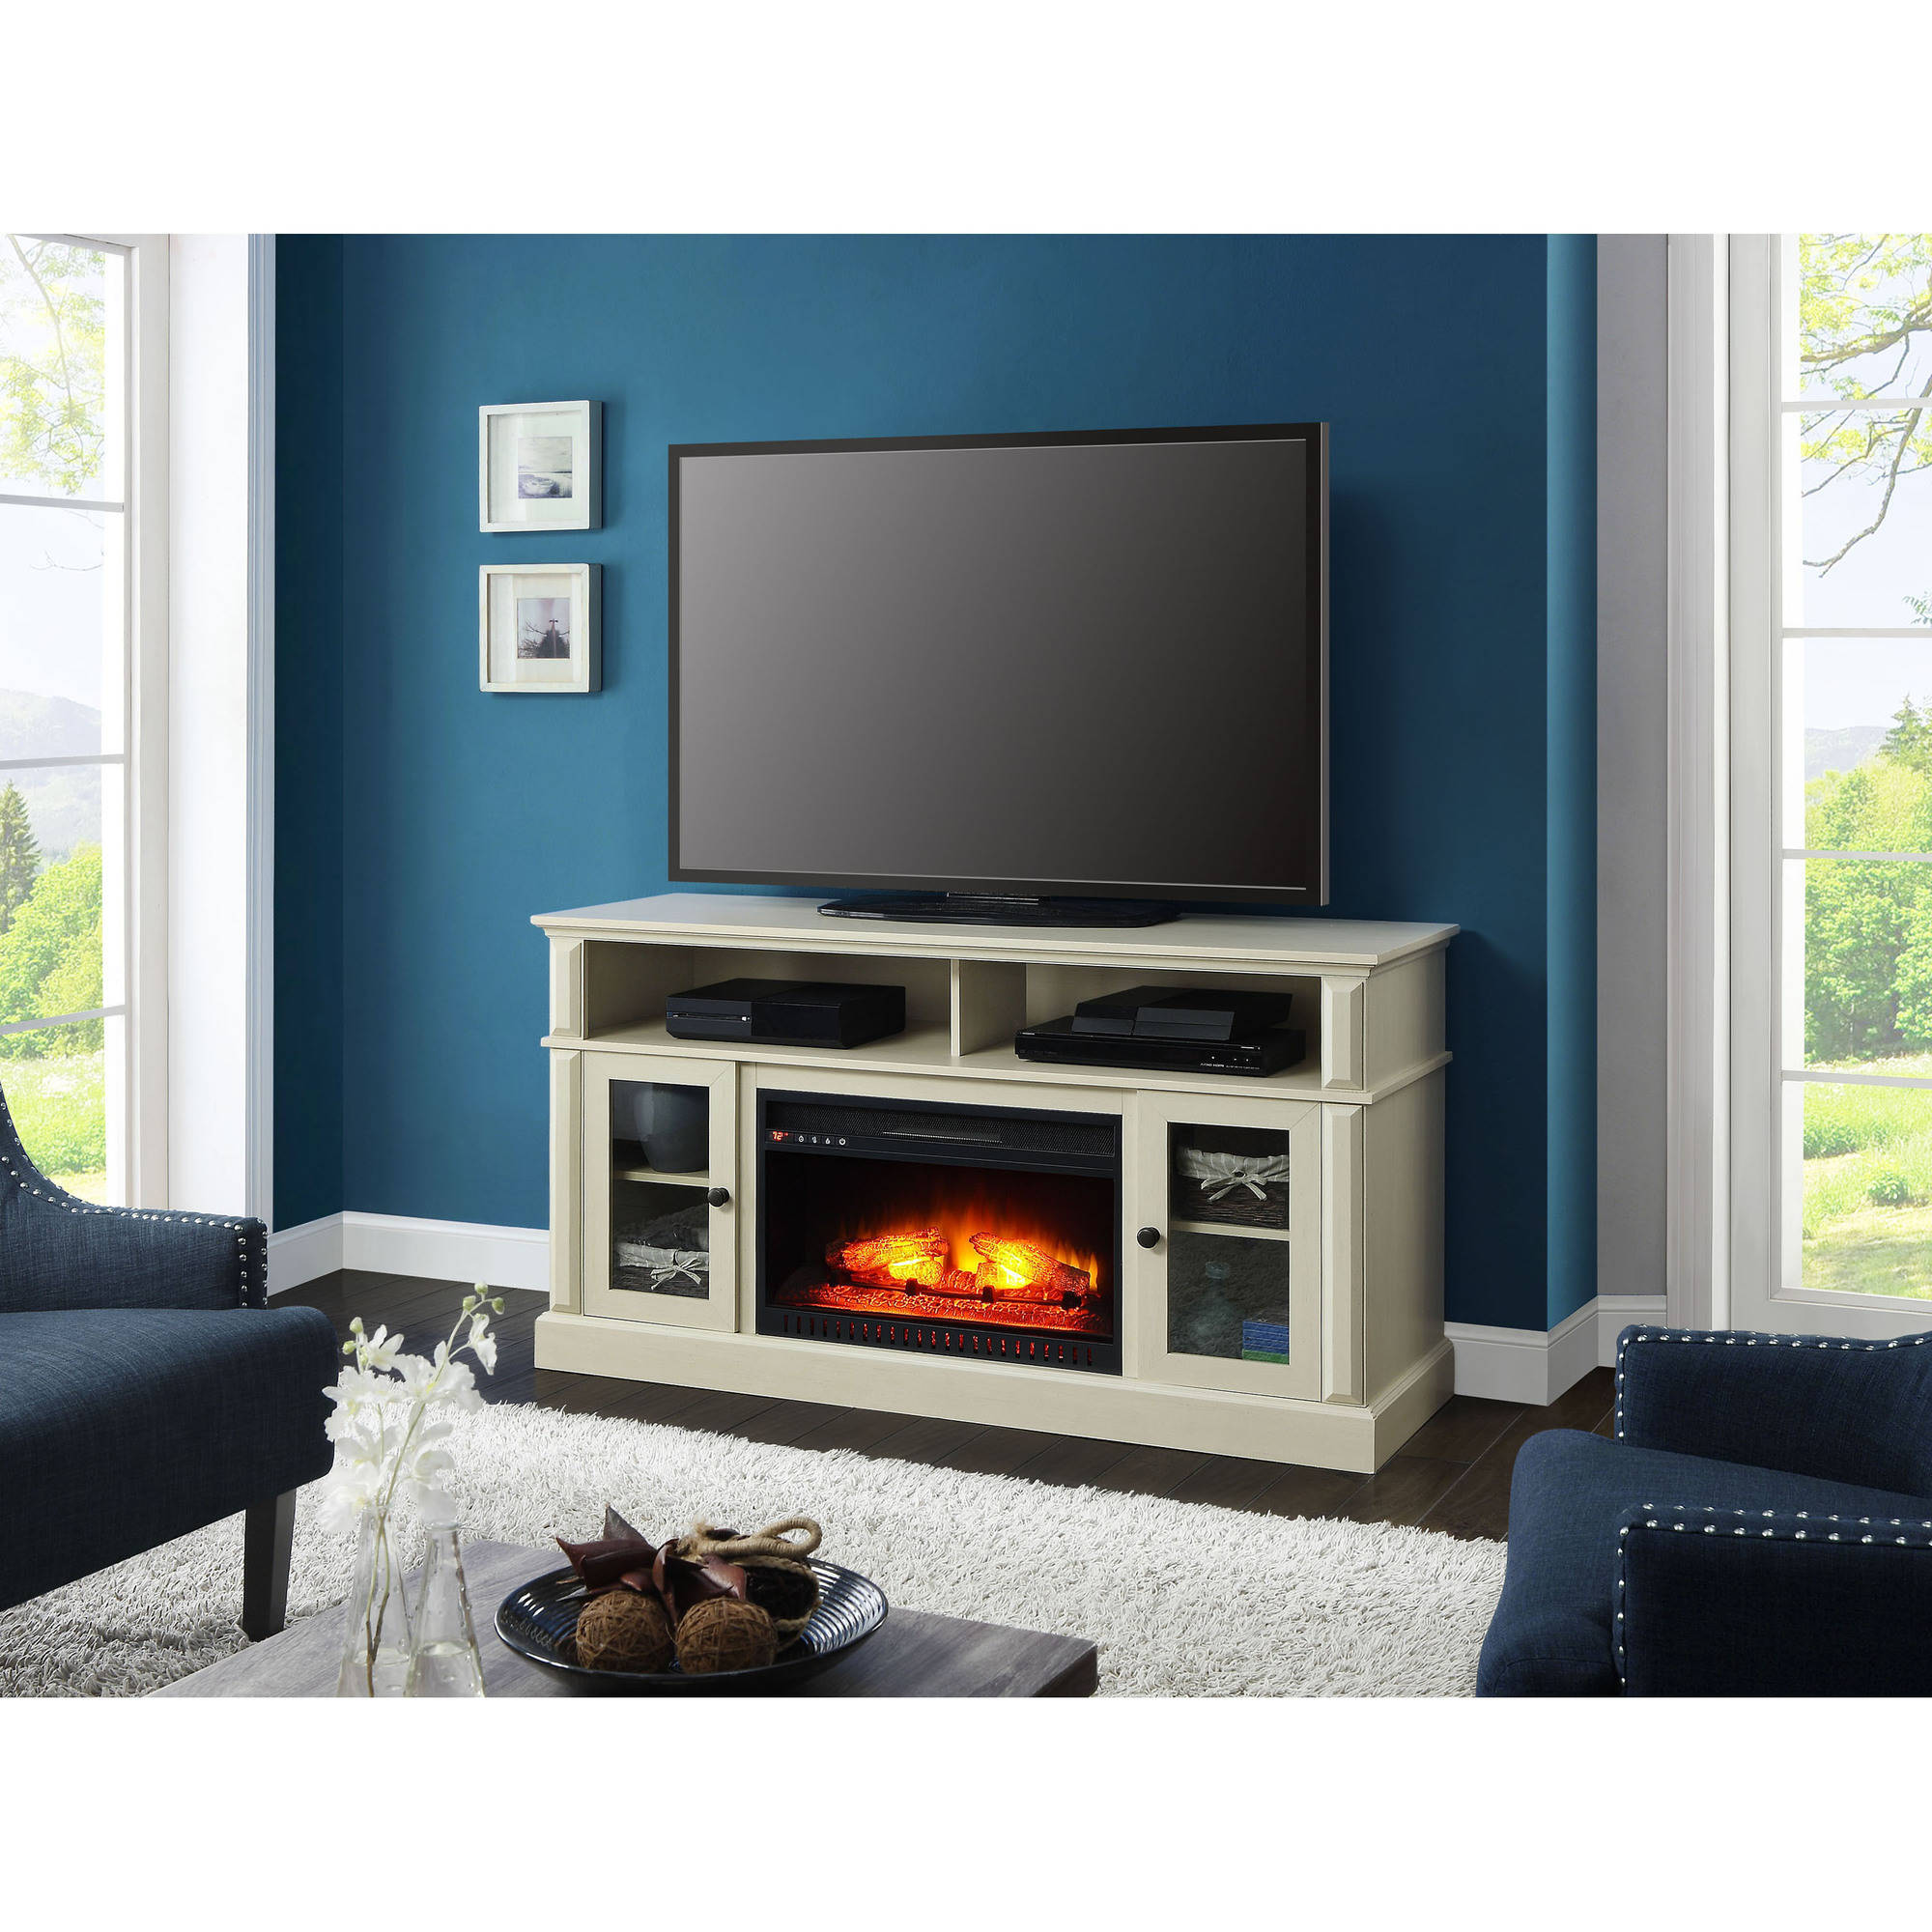 Fireplace Tv Stand with Bluetooth Speakers Elegant Whalen Barston Media Fireplace for Tv S Up to 70 Multiple